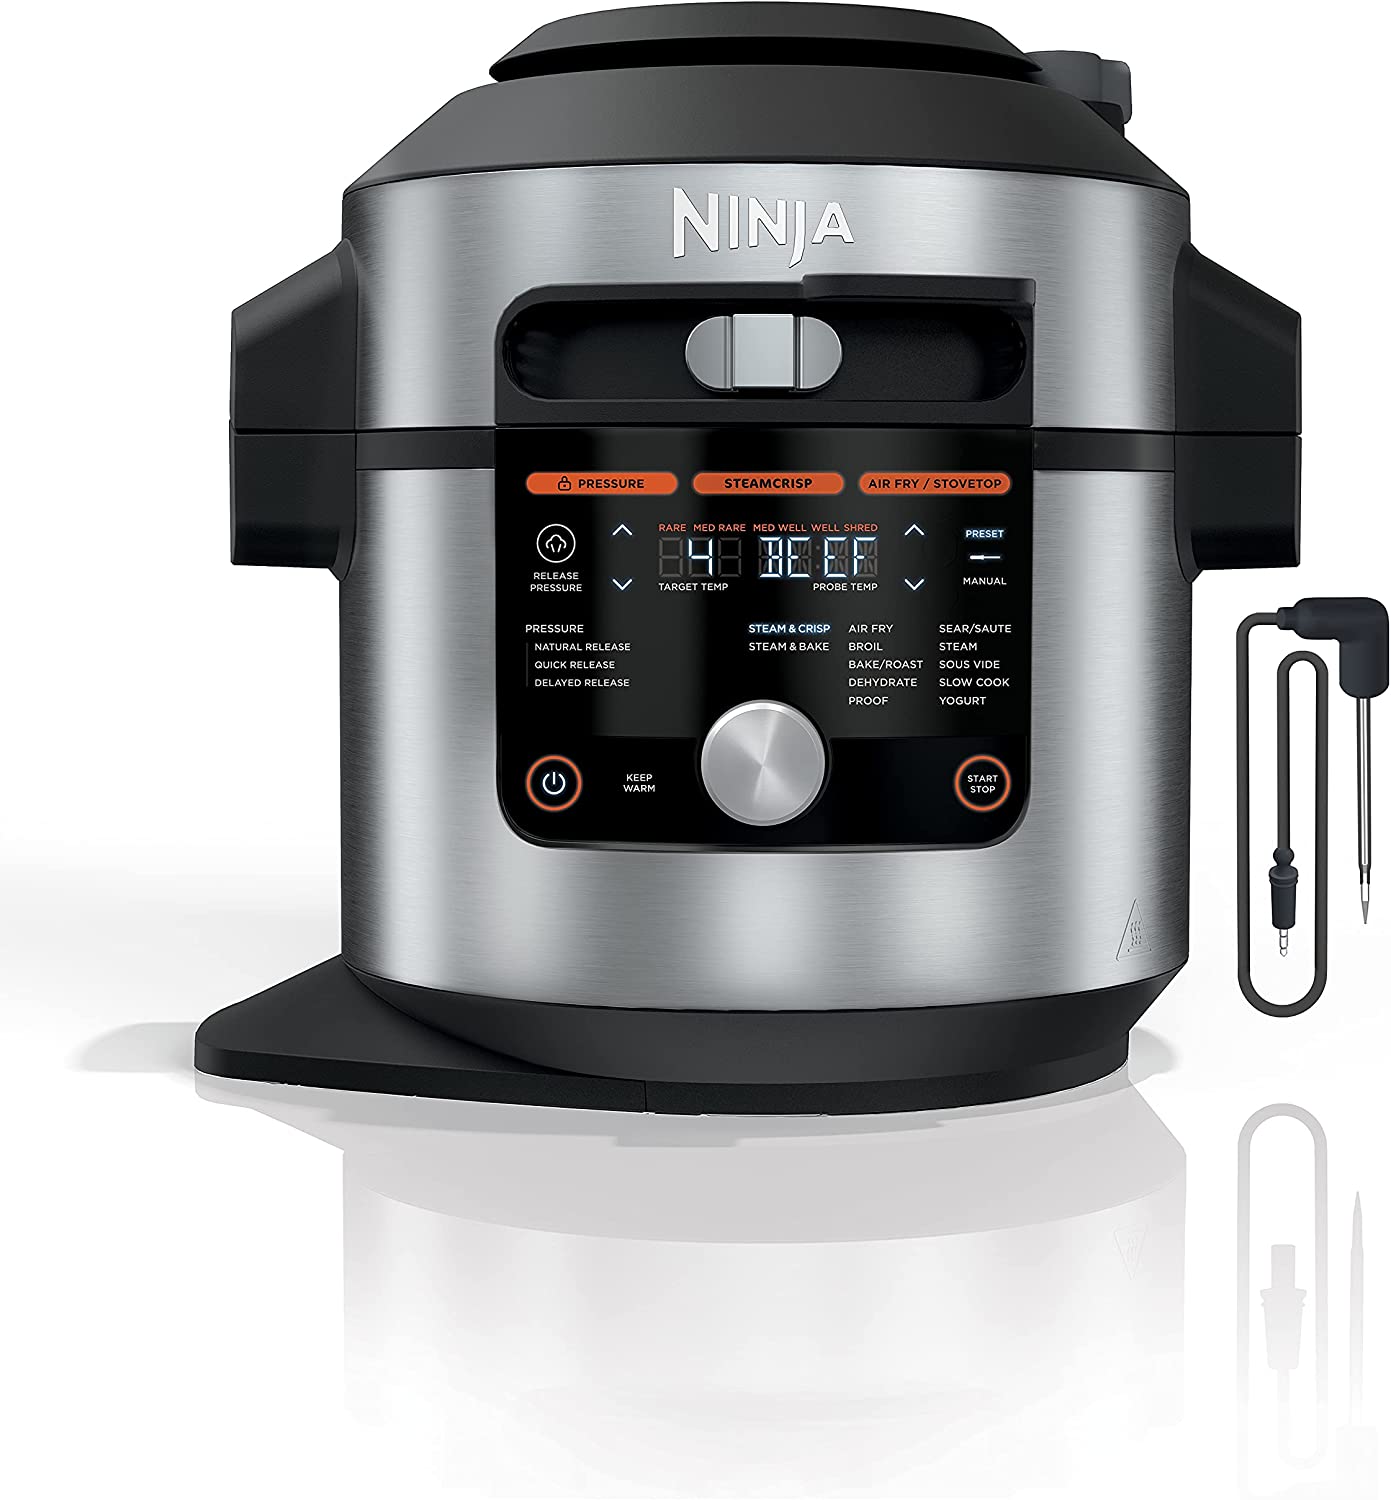 Ninja OL701 Foodi SMART XL 8 Qt. Pressure Cooker Steam Fryer with SmartLid & Thermometer + Auto-Steam Release, 14-in-1 $249.99